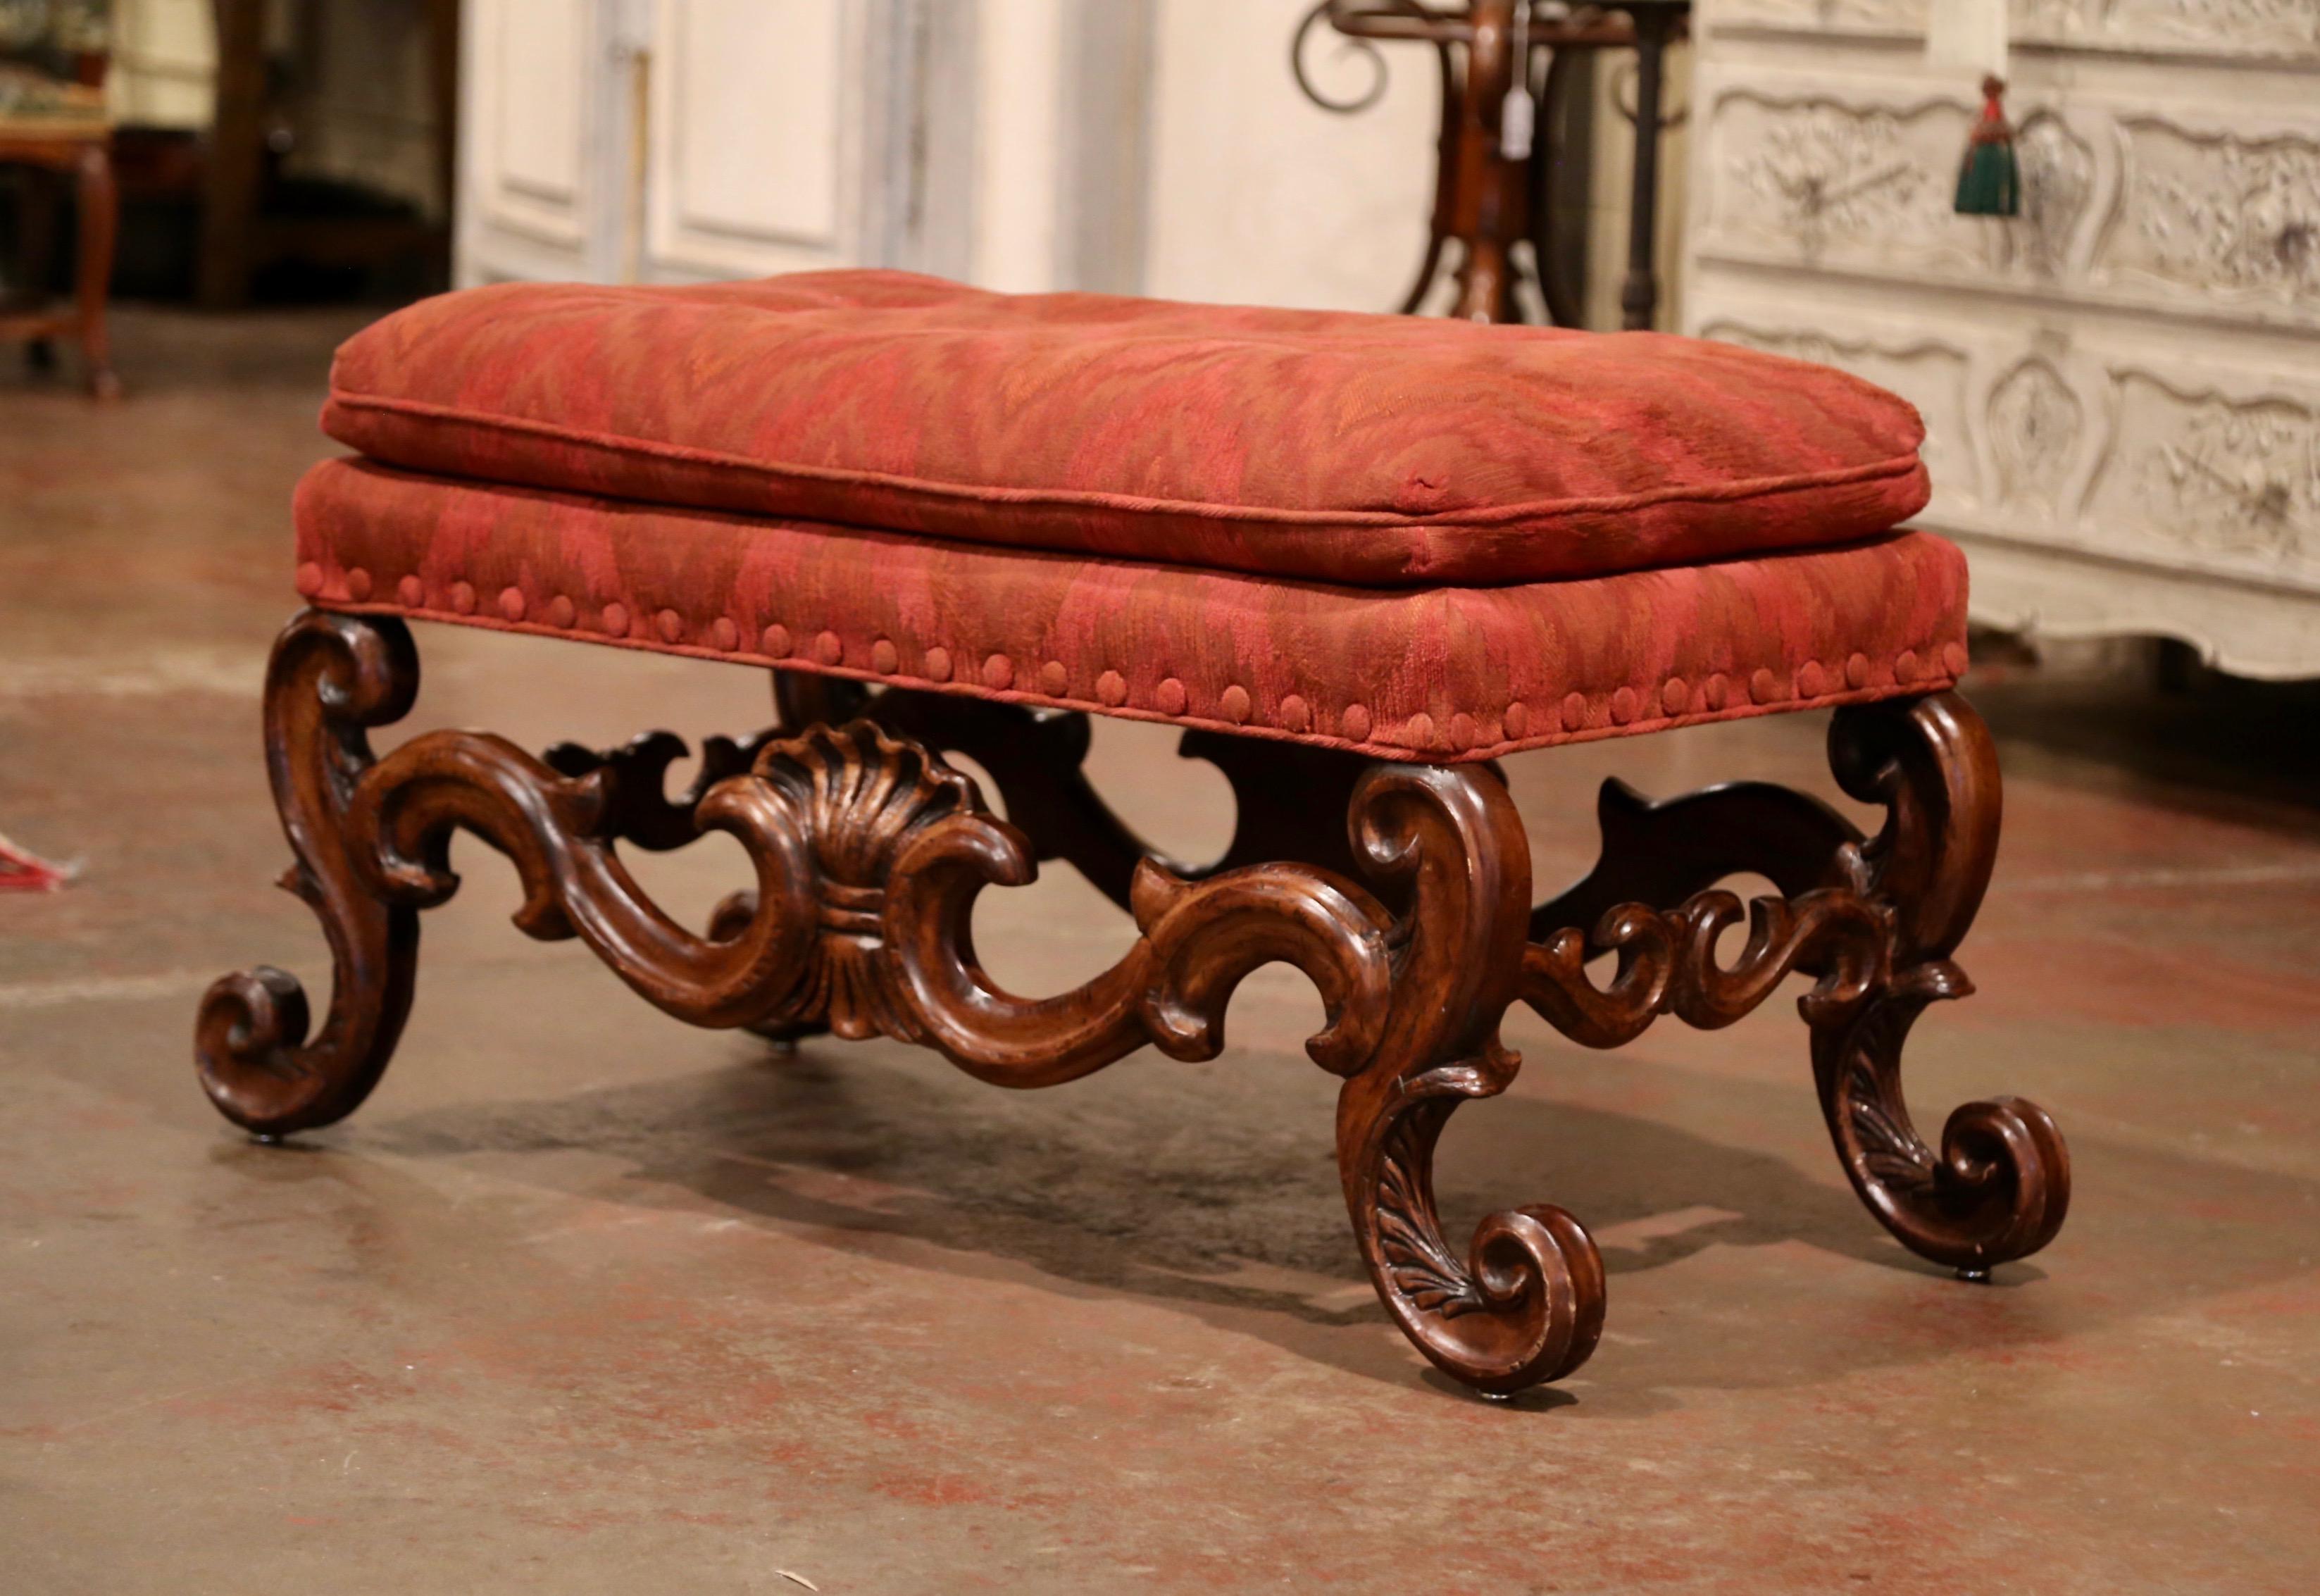 Fabric Midcentury Italian Baroque Carved Walnut Ottoman Bench with Red Velvet Uphostery